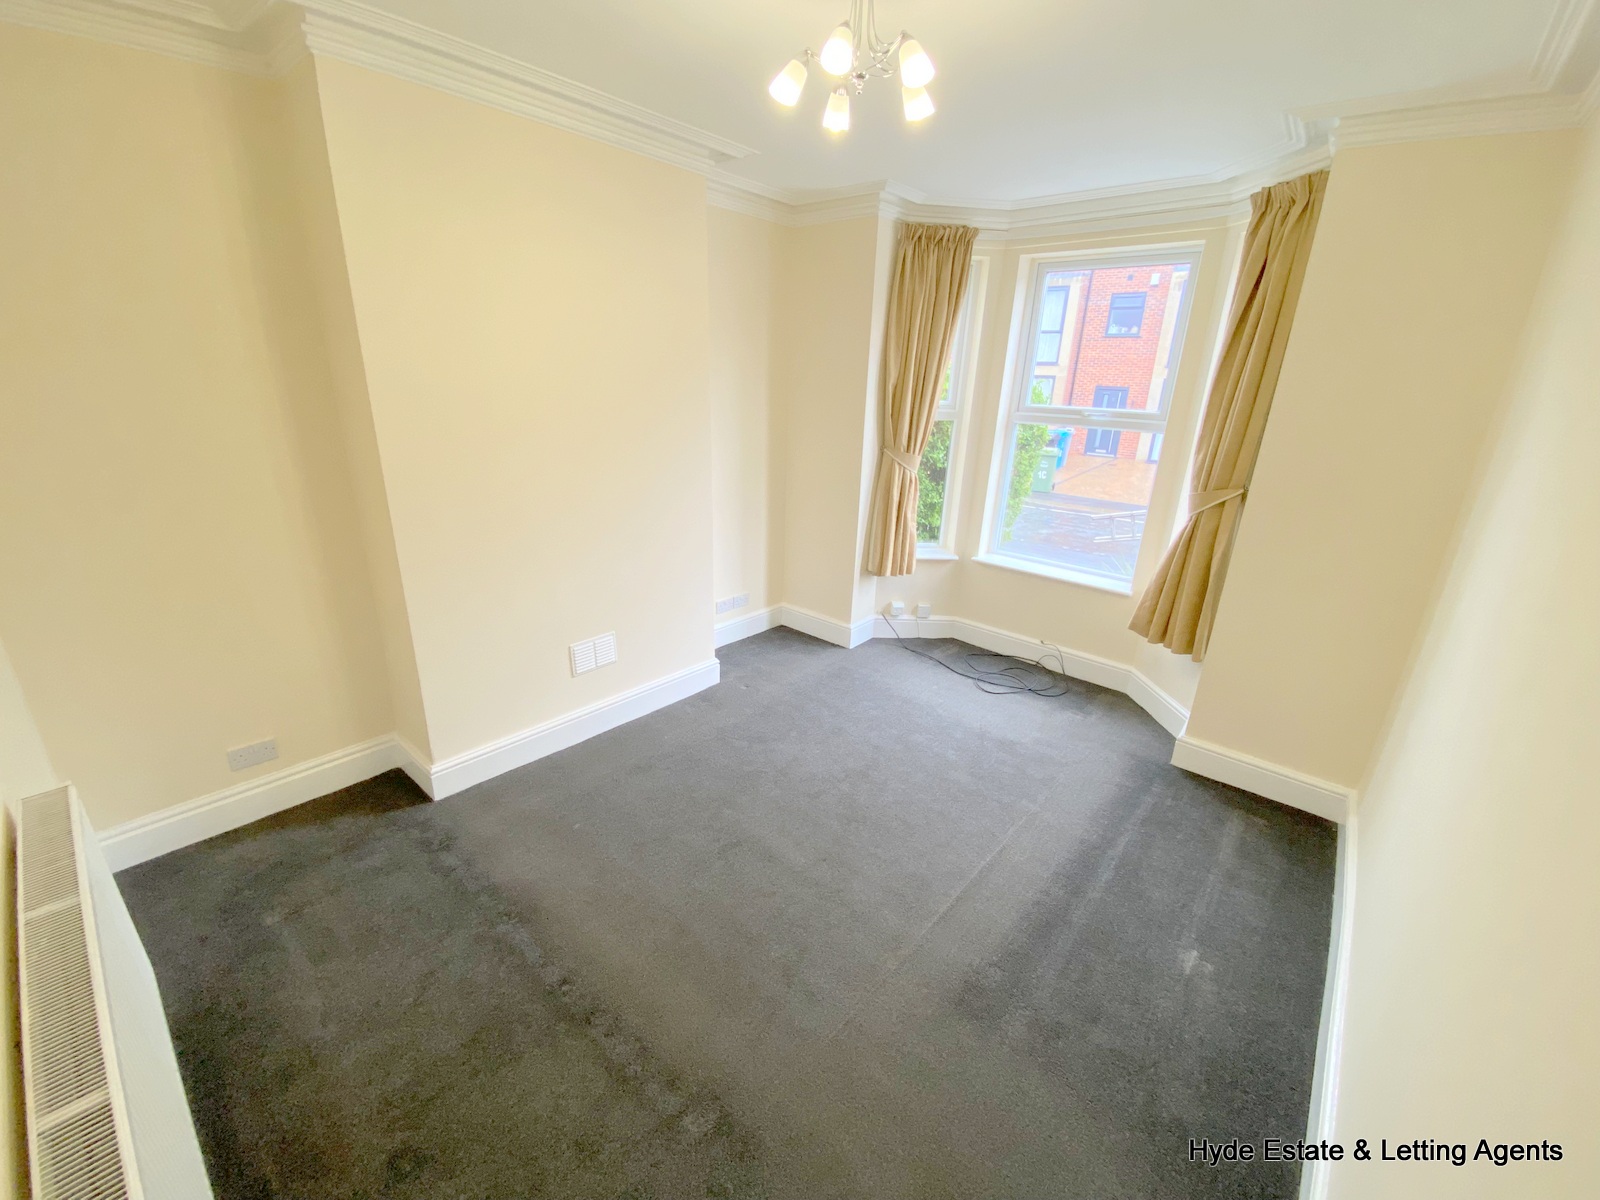 Images for Heywood Road, Sale, Manchester, M33 3WB